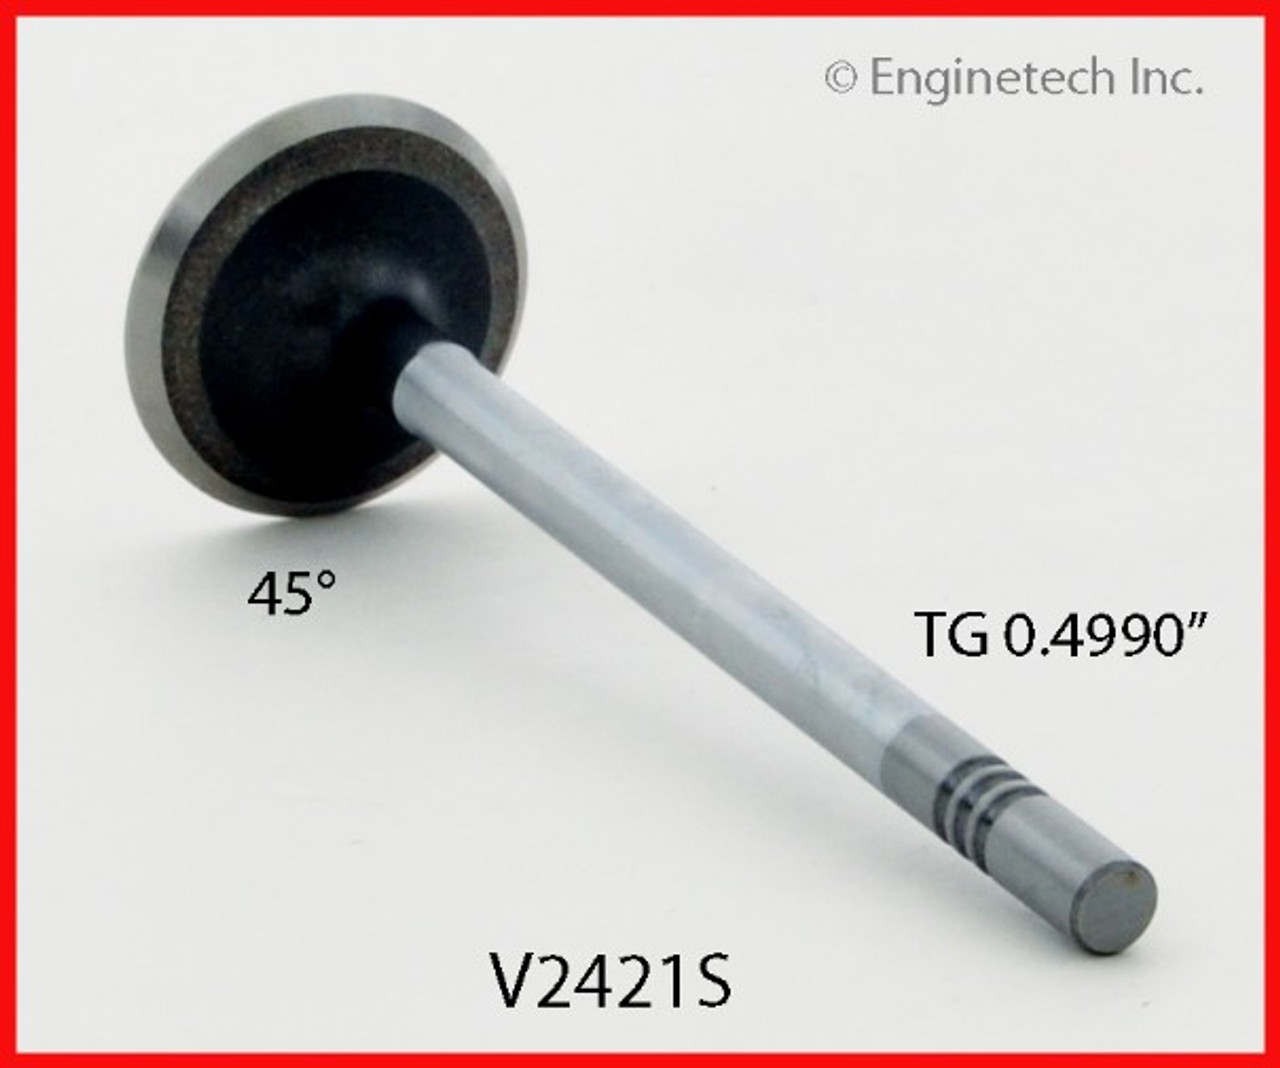 Exhaust Valve - 1998 Ford F-150 5.4L (V2421S.F58)